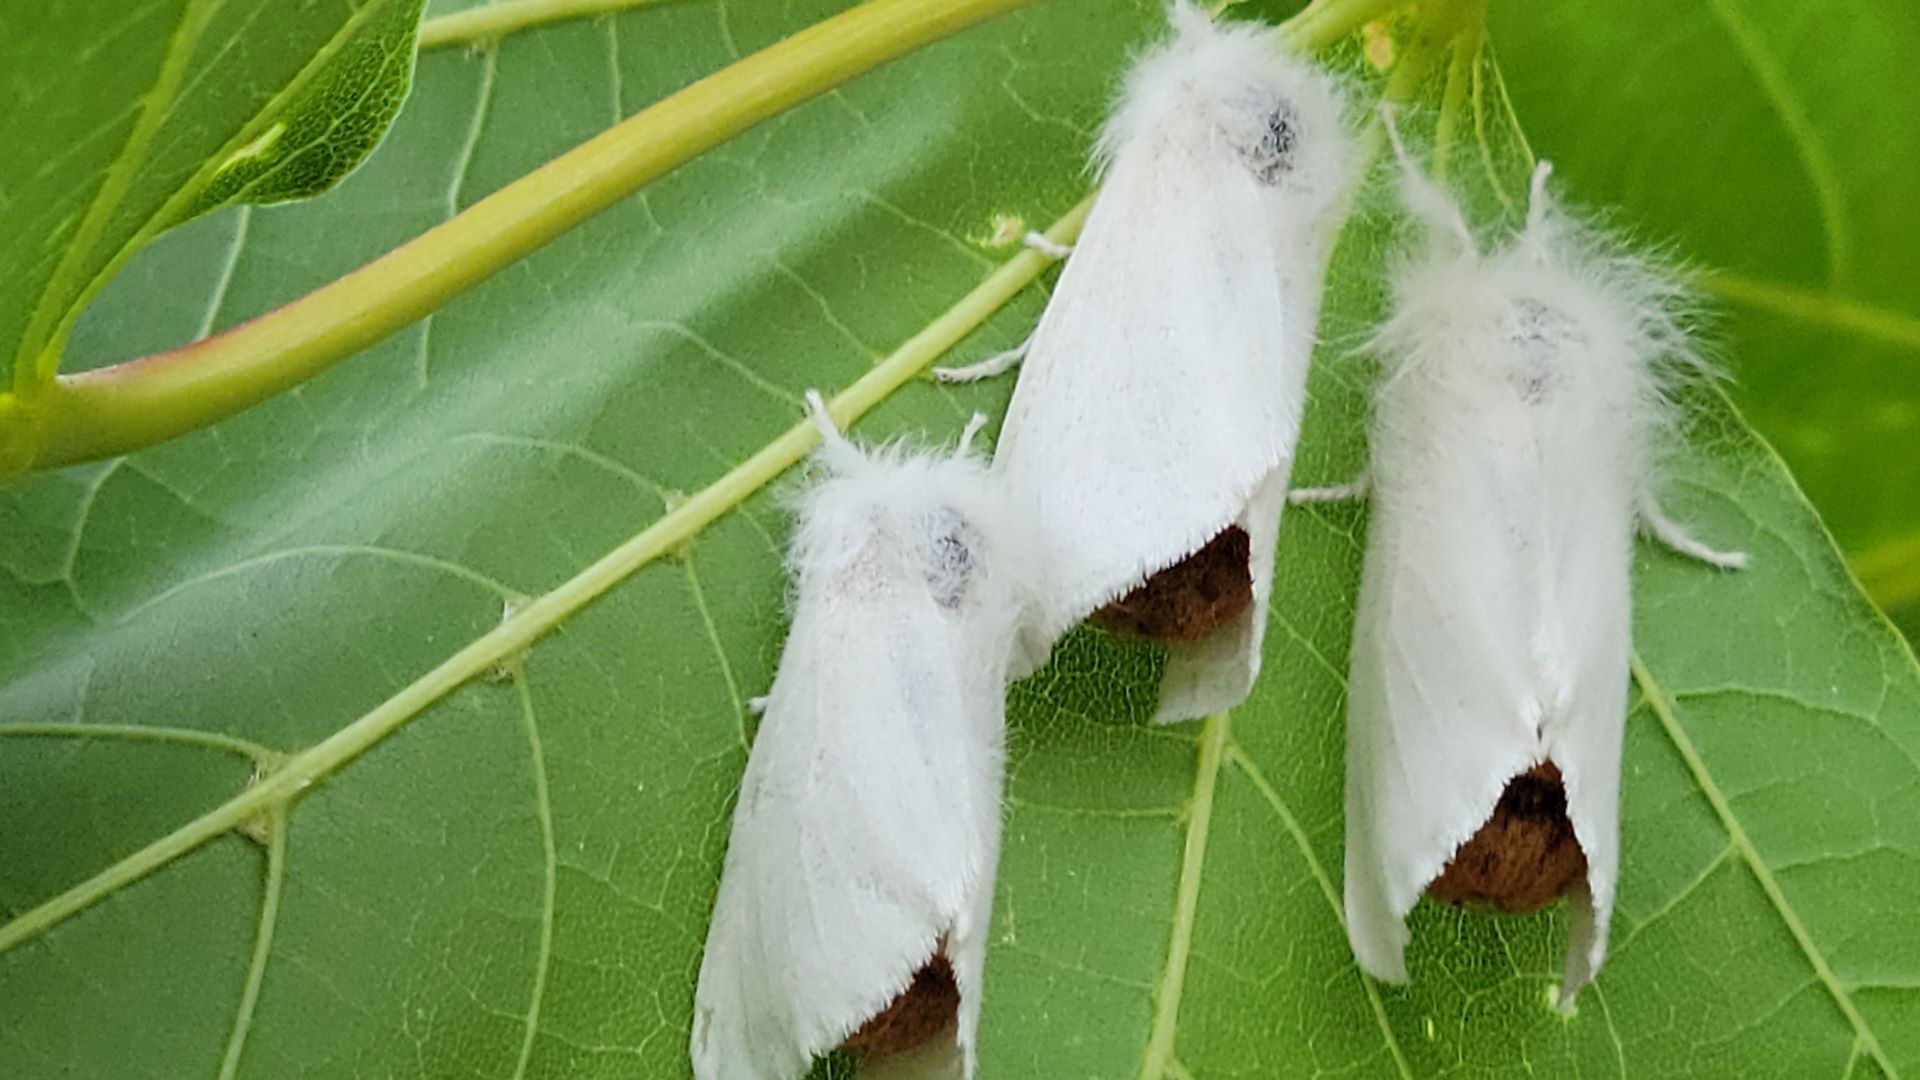 https://themainemonitor.org/wp-content/uploads/2021/08/browntail-moths-.jpg